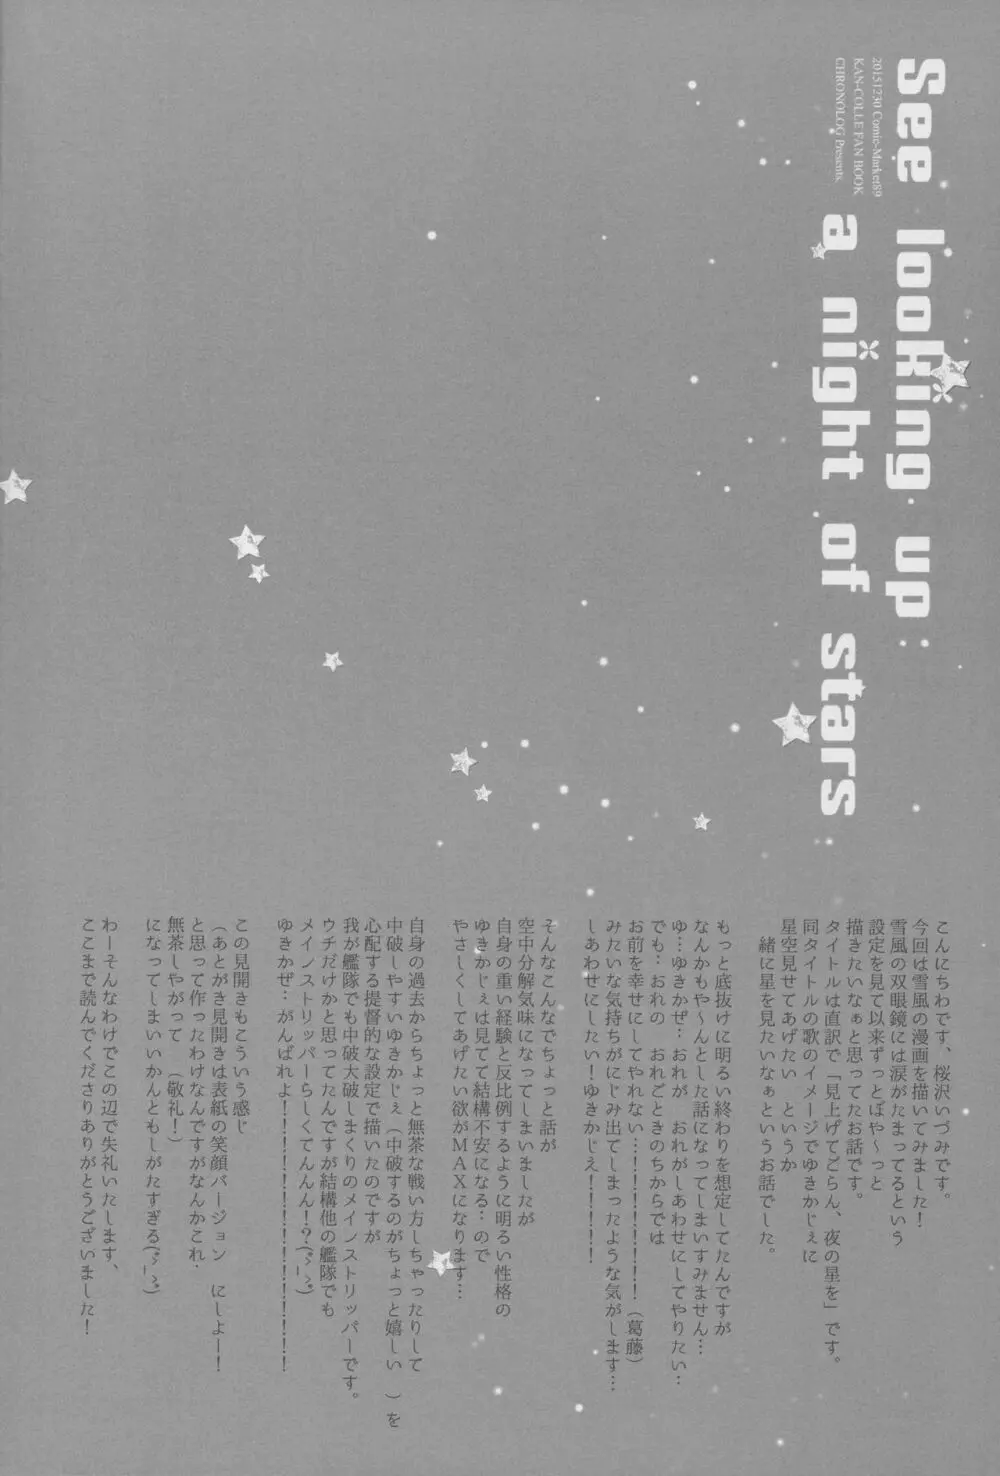 See looking up a night of stars - page23